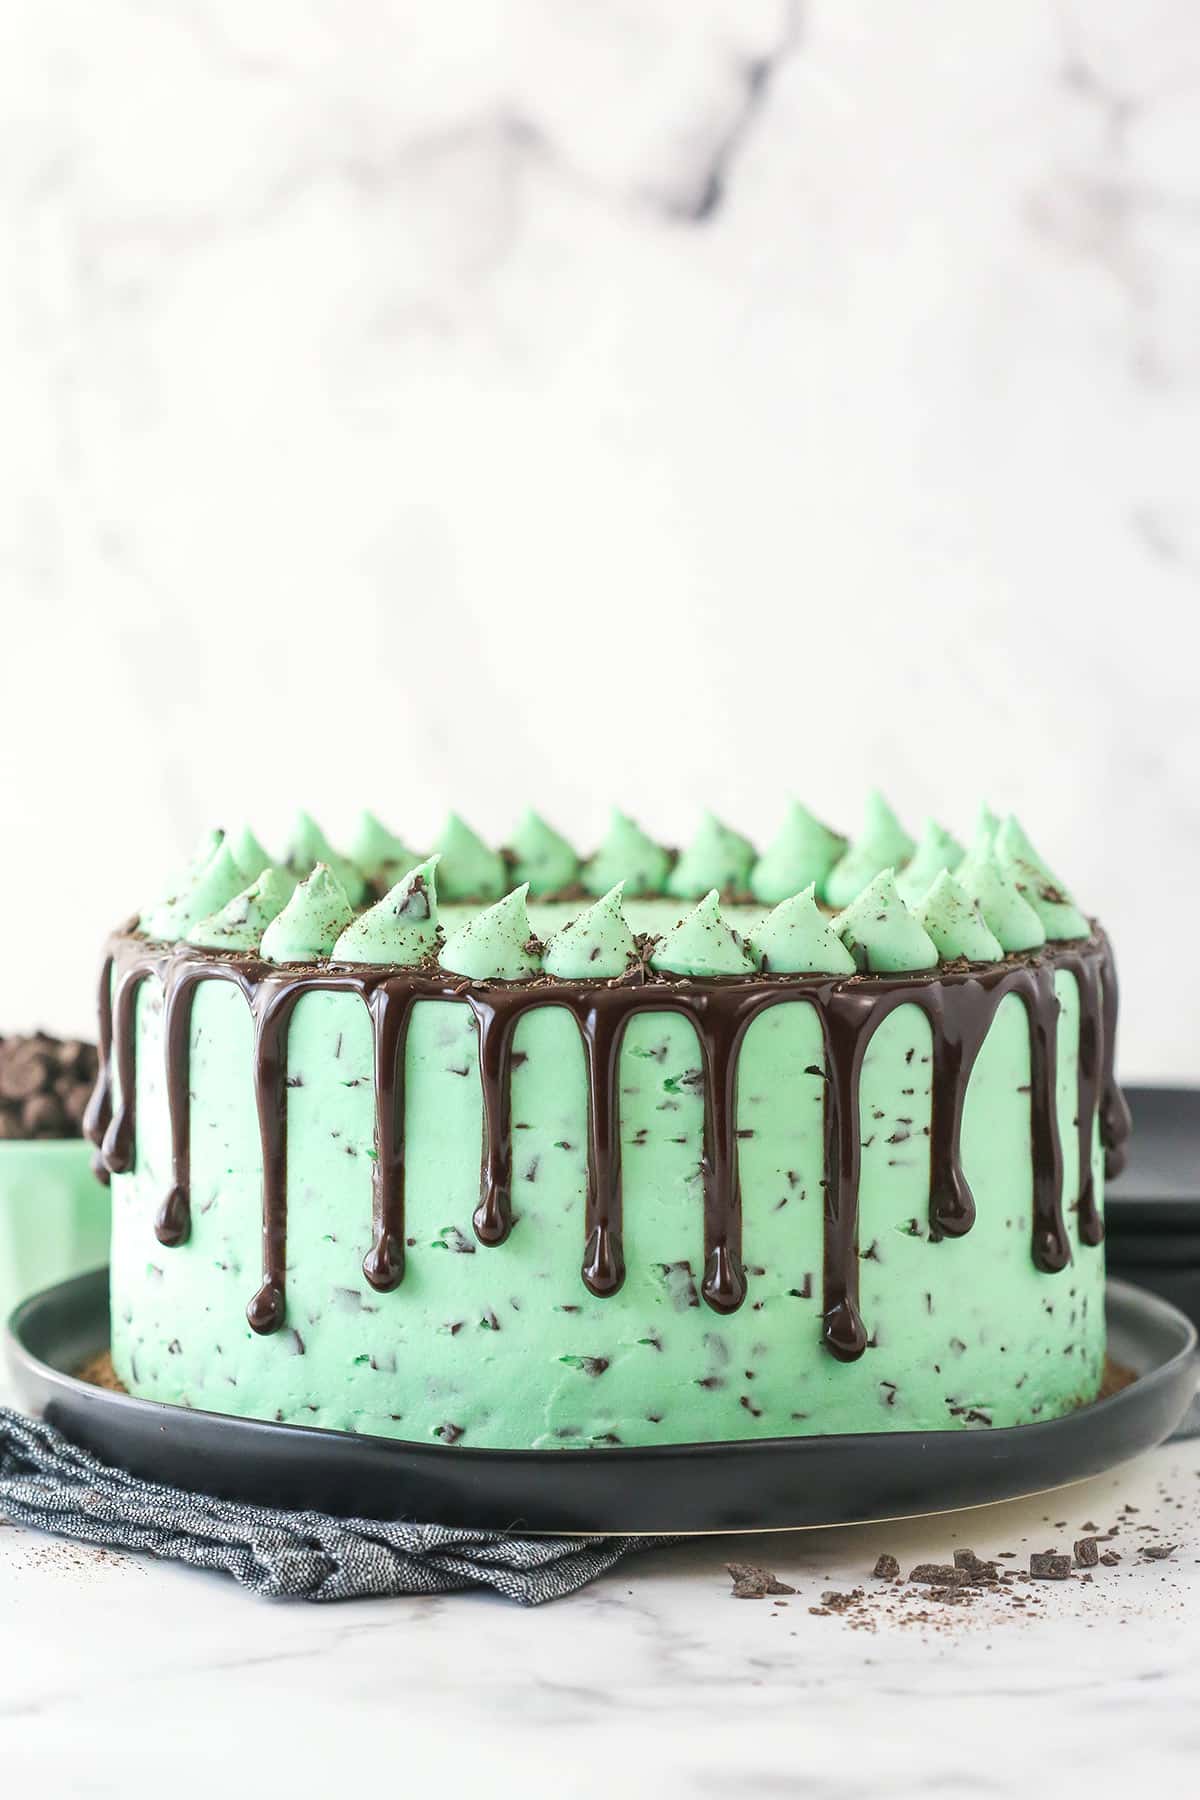 Mint chocolate cake on a serving plate.